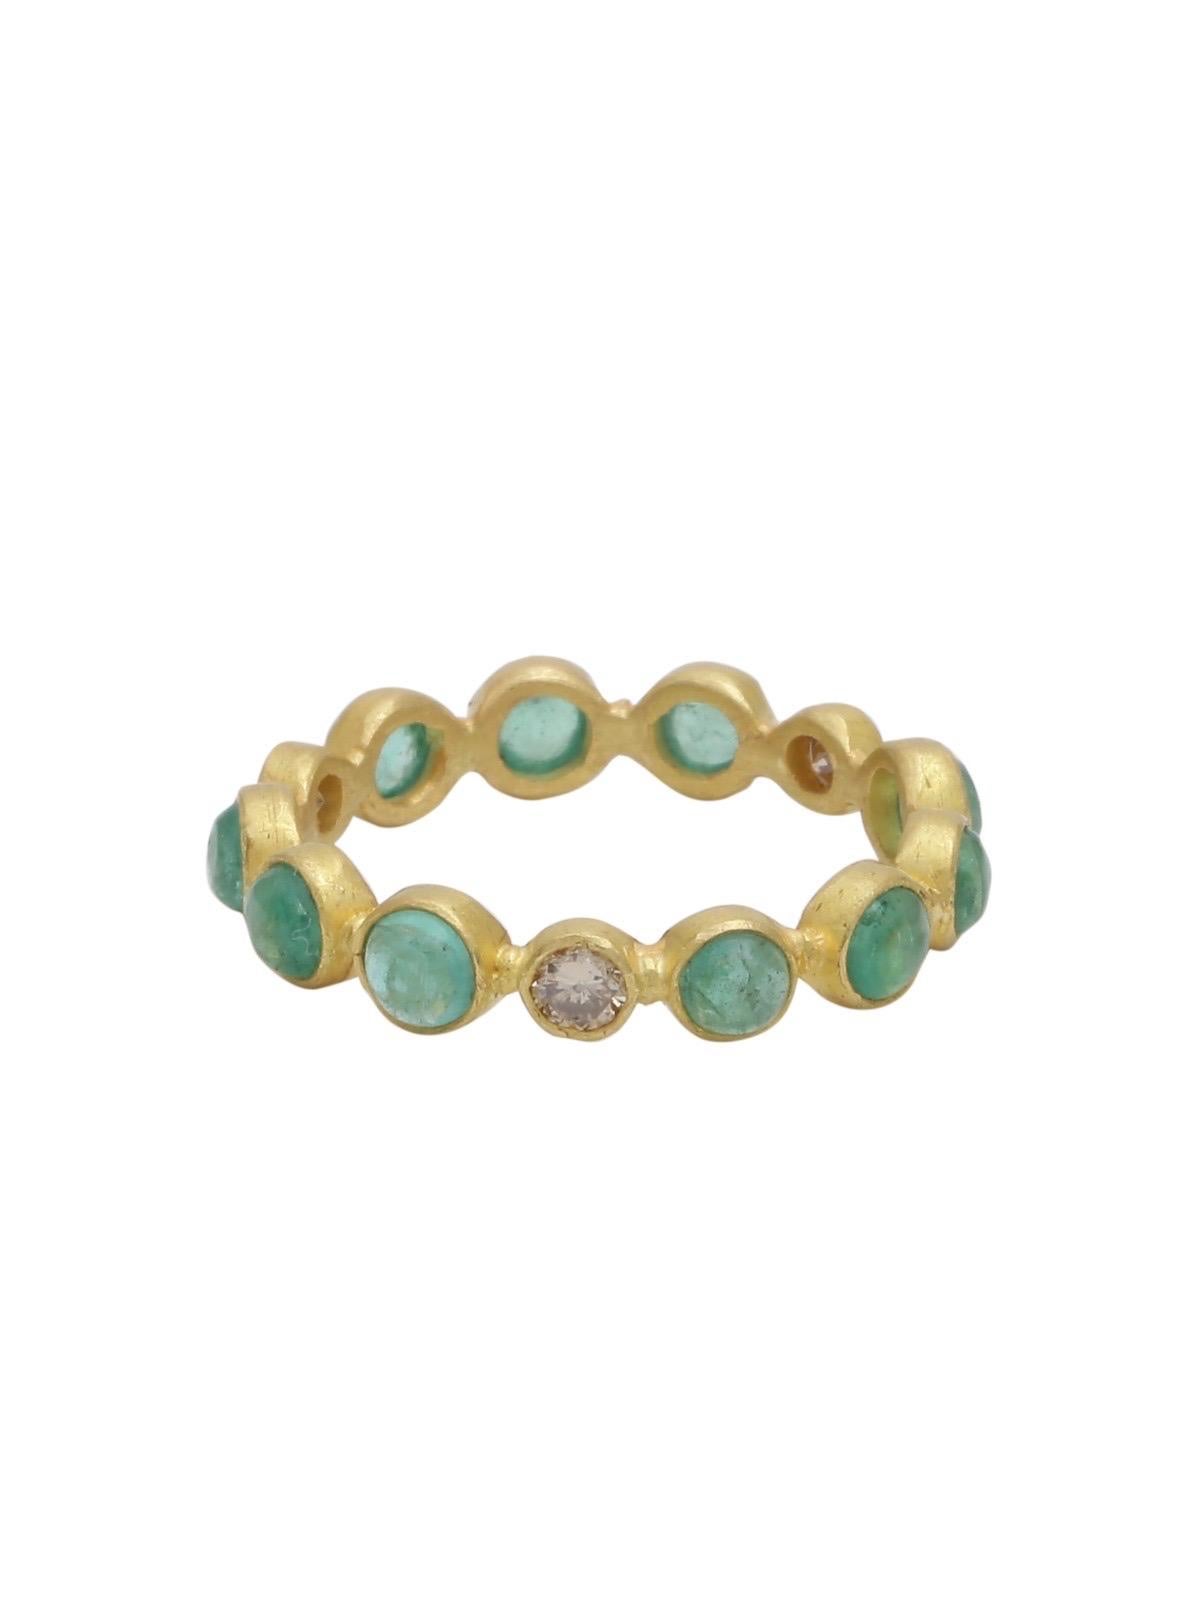 This beautifully handcrafted eternity band in 22k Matte gold finish is adorned with round emerald cabochons and diamonds . 
The ring is completely handmade and was created by extremely talented artisans of Jaipur - the city known worldwide for its